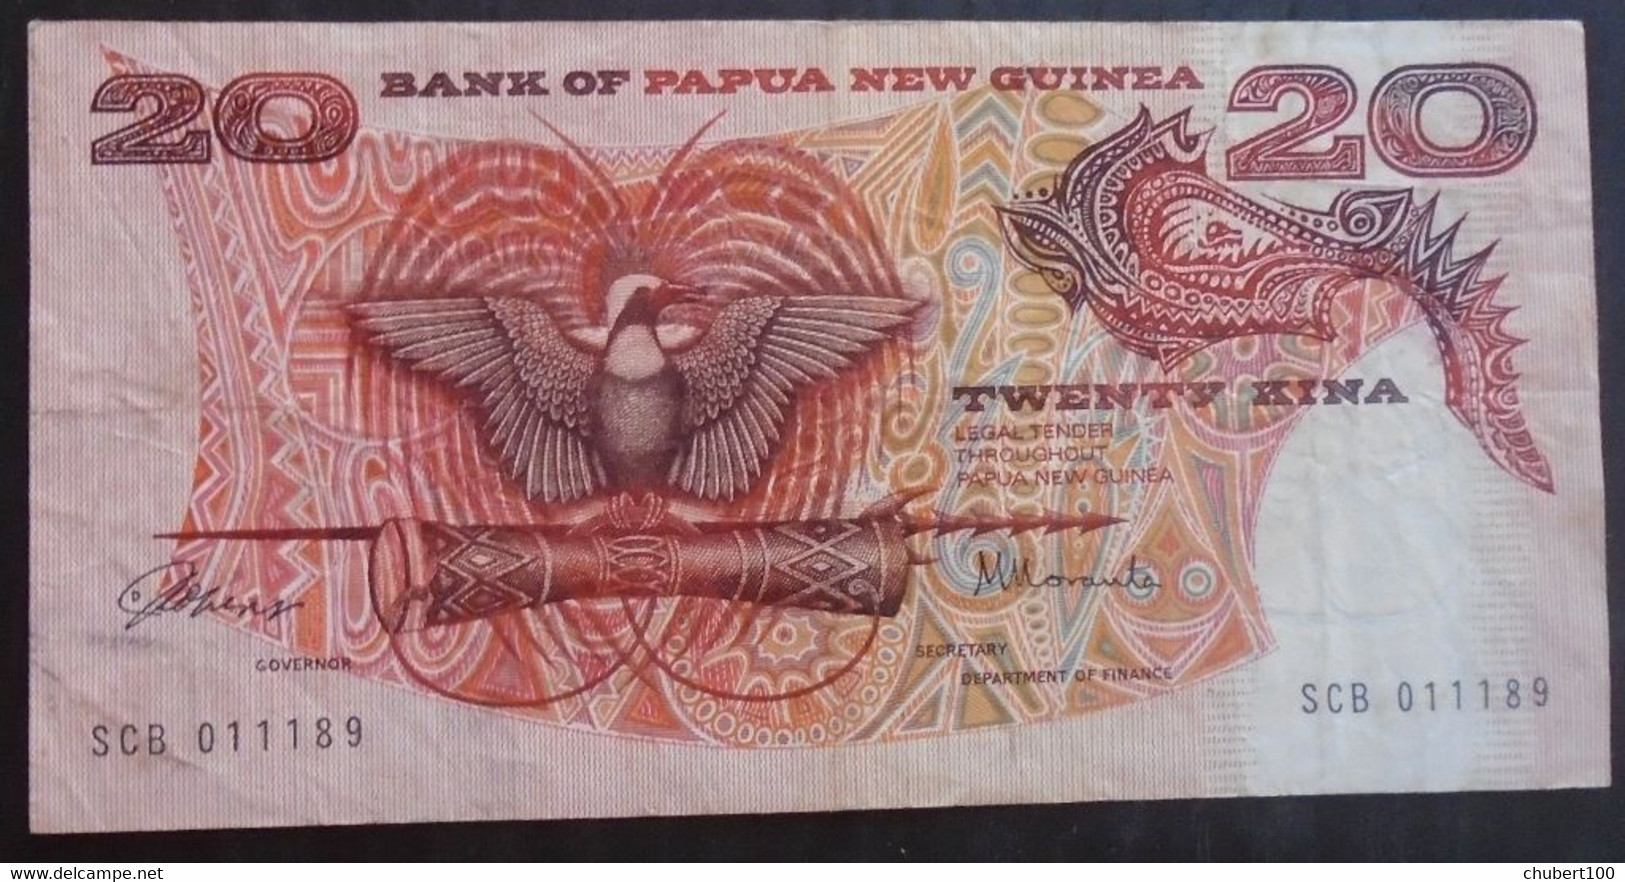 PAPUA ,  P 4,   20 Kina  , ND 1977 ,  VF , RARE: The Only One On Delcampe - Papouasie-Nouvelle-Guinée